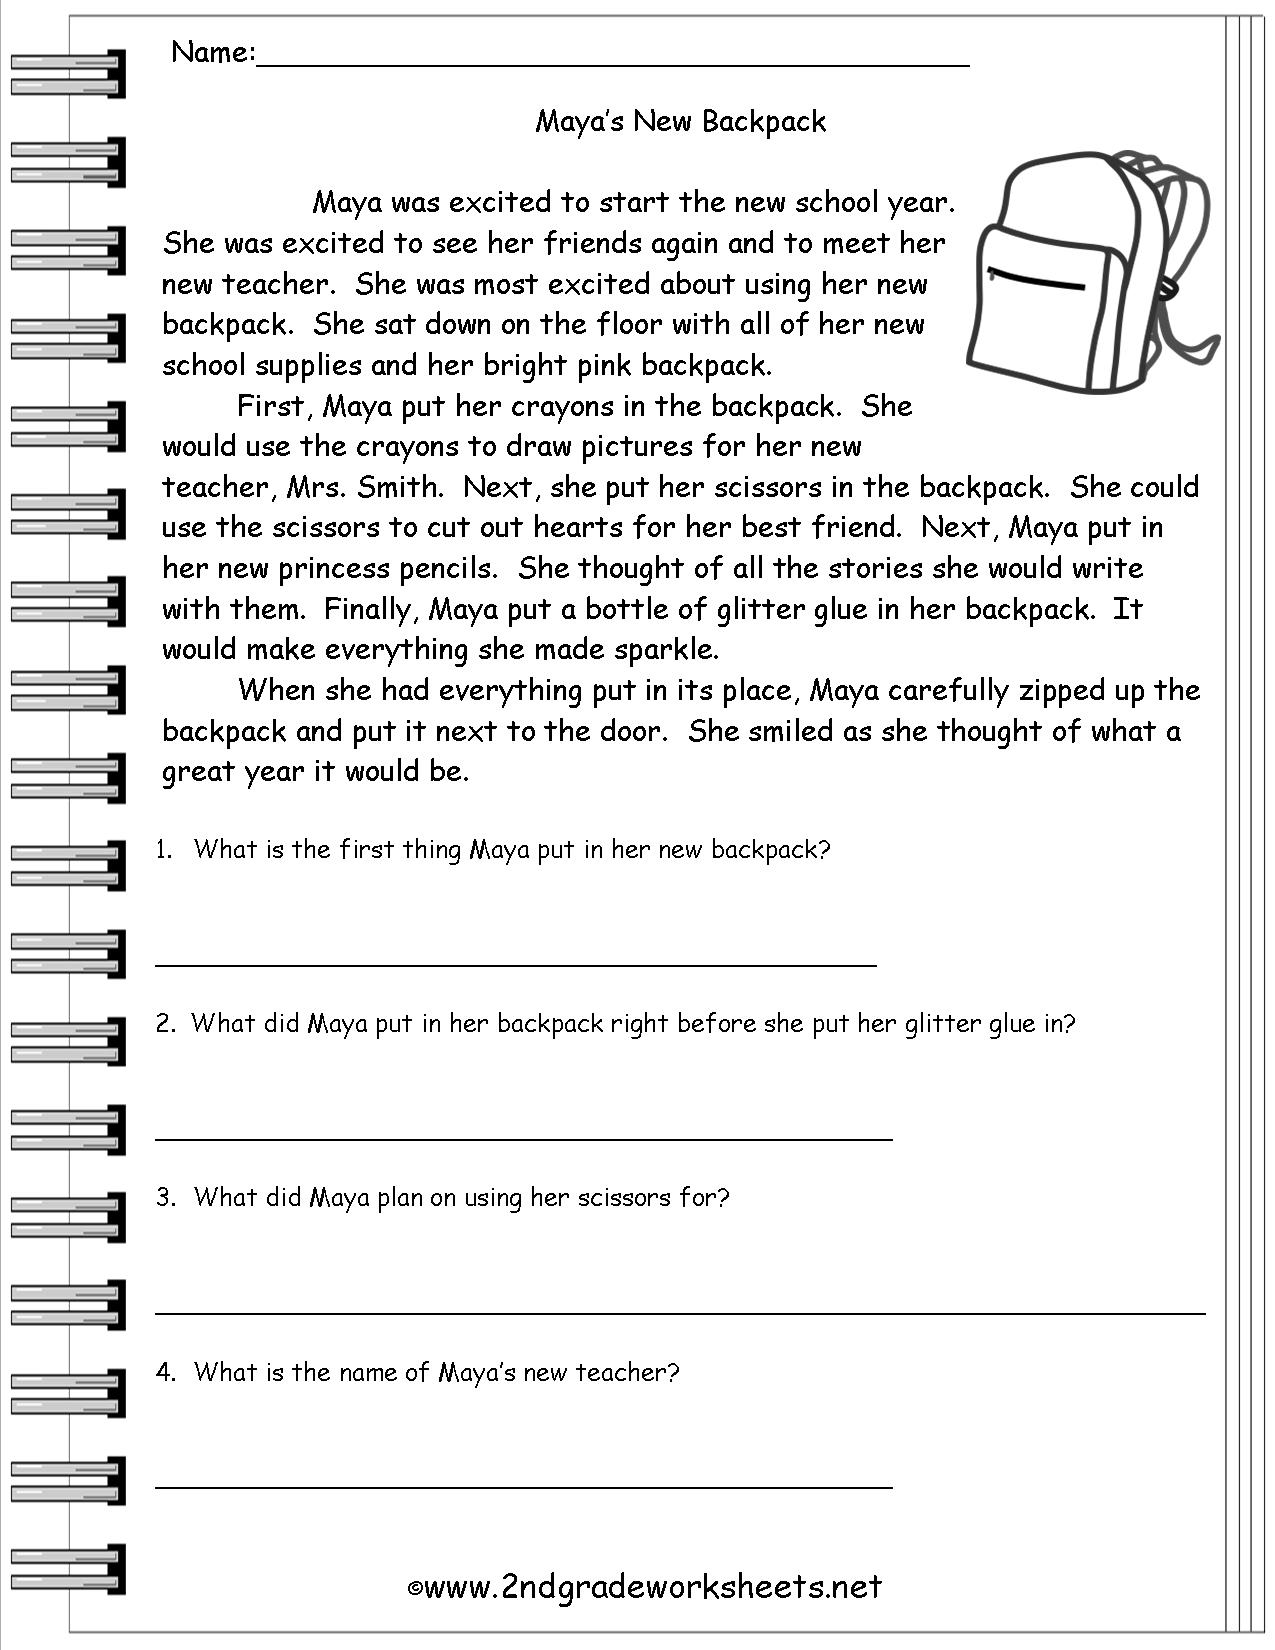 7 Best Images of Writing 4th Grade Reading Worksheets